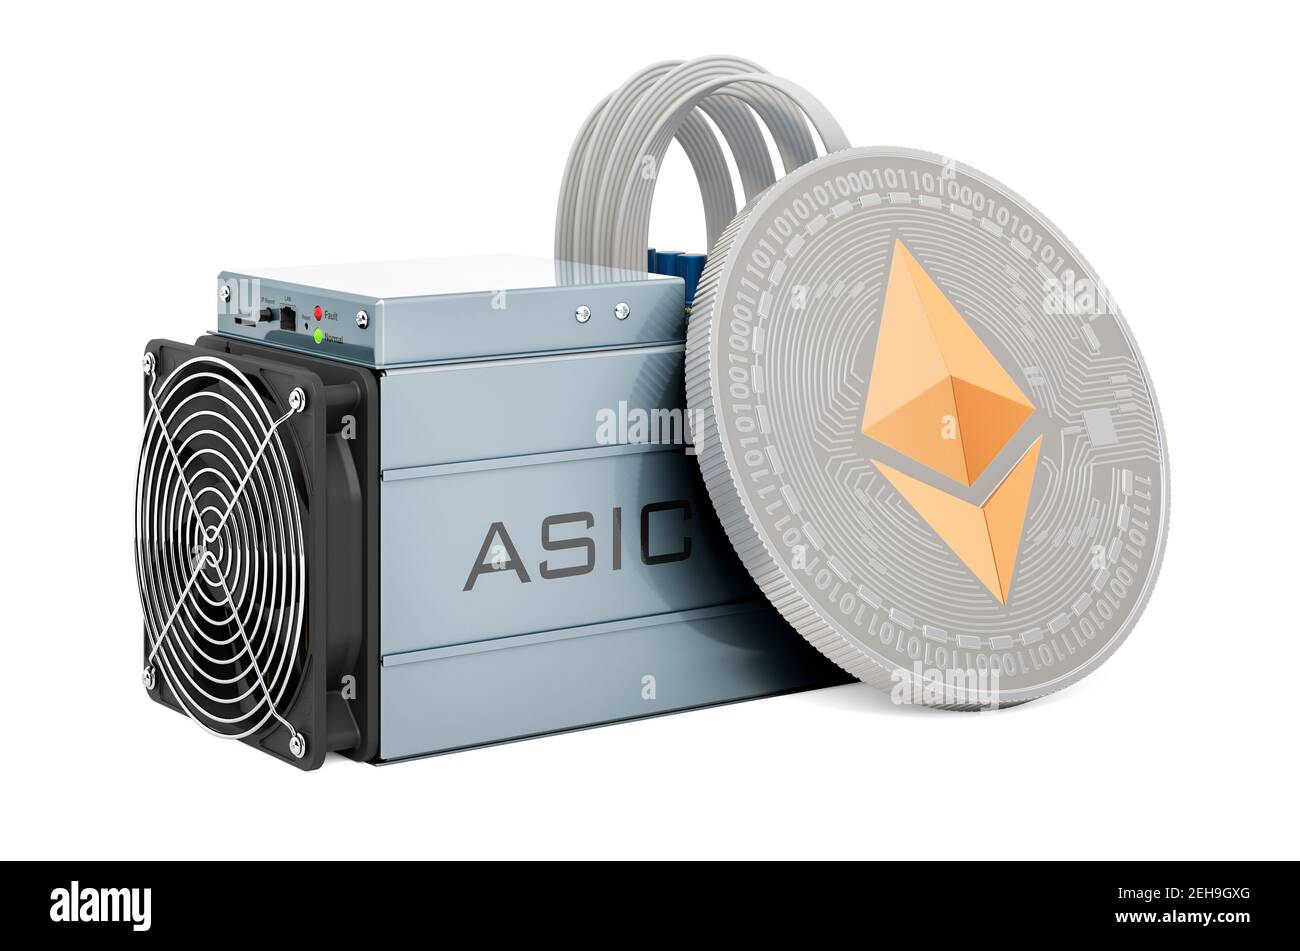 Asic cards for ethereum cryptocurrencies and illicit flows